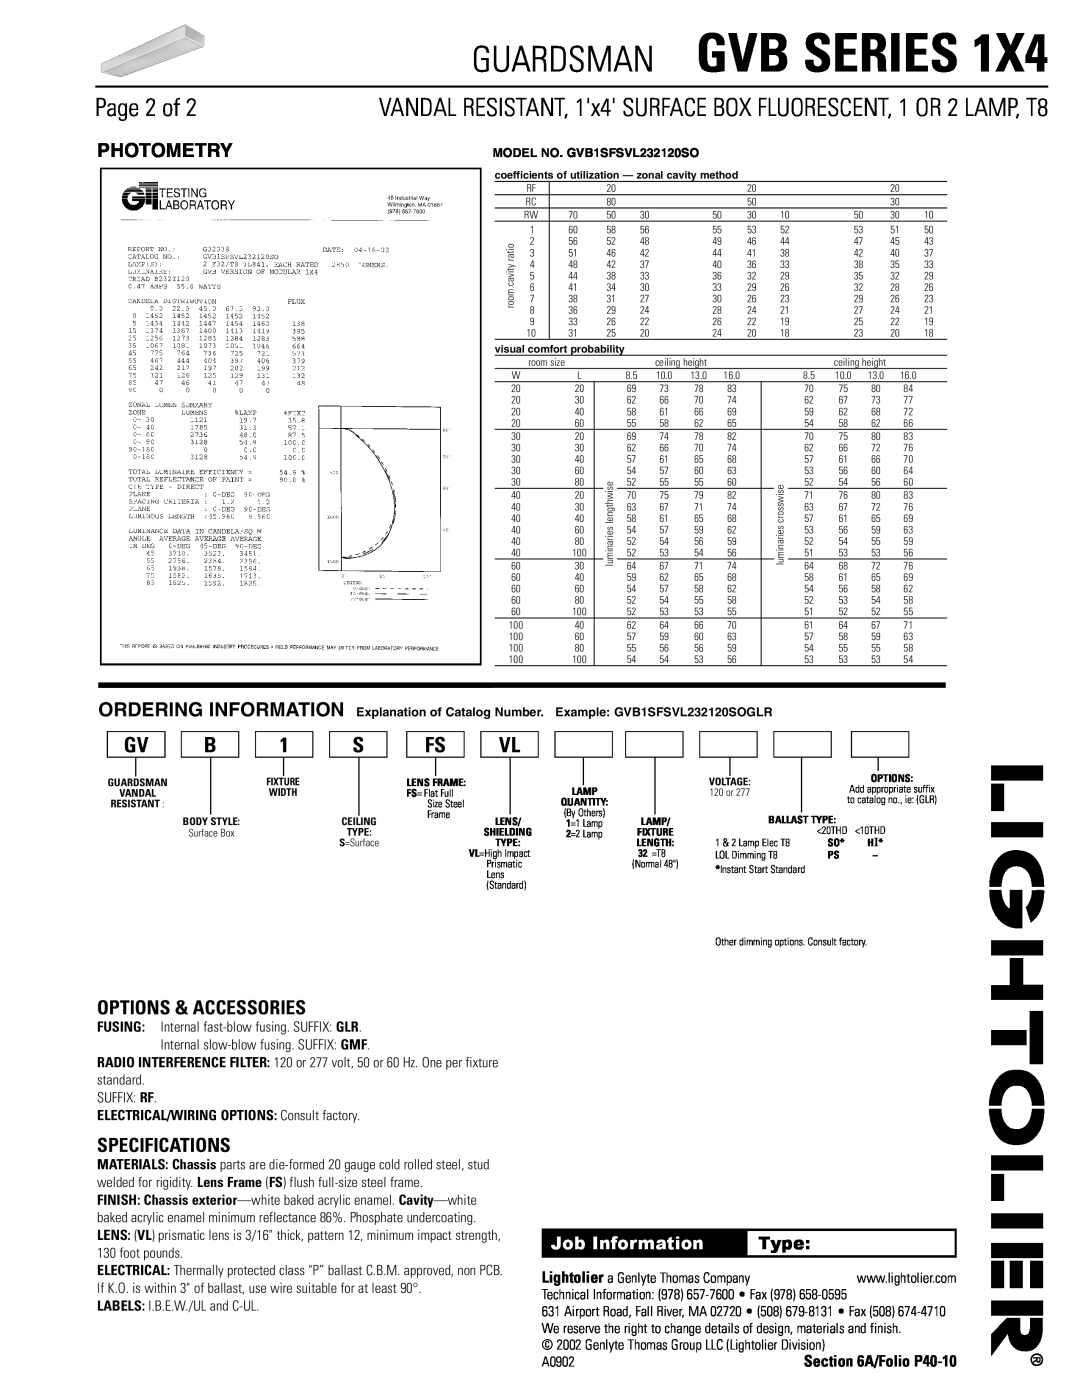 Lightolier GVB SERIES 1X4 Page 2 of, Options & Accessories, Specifications, Guardsman Gvb Series, Gv B, Photometry, Type 